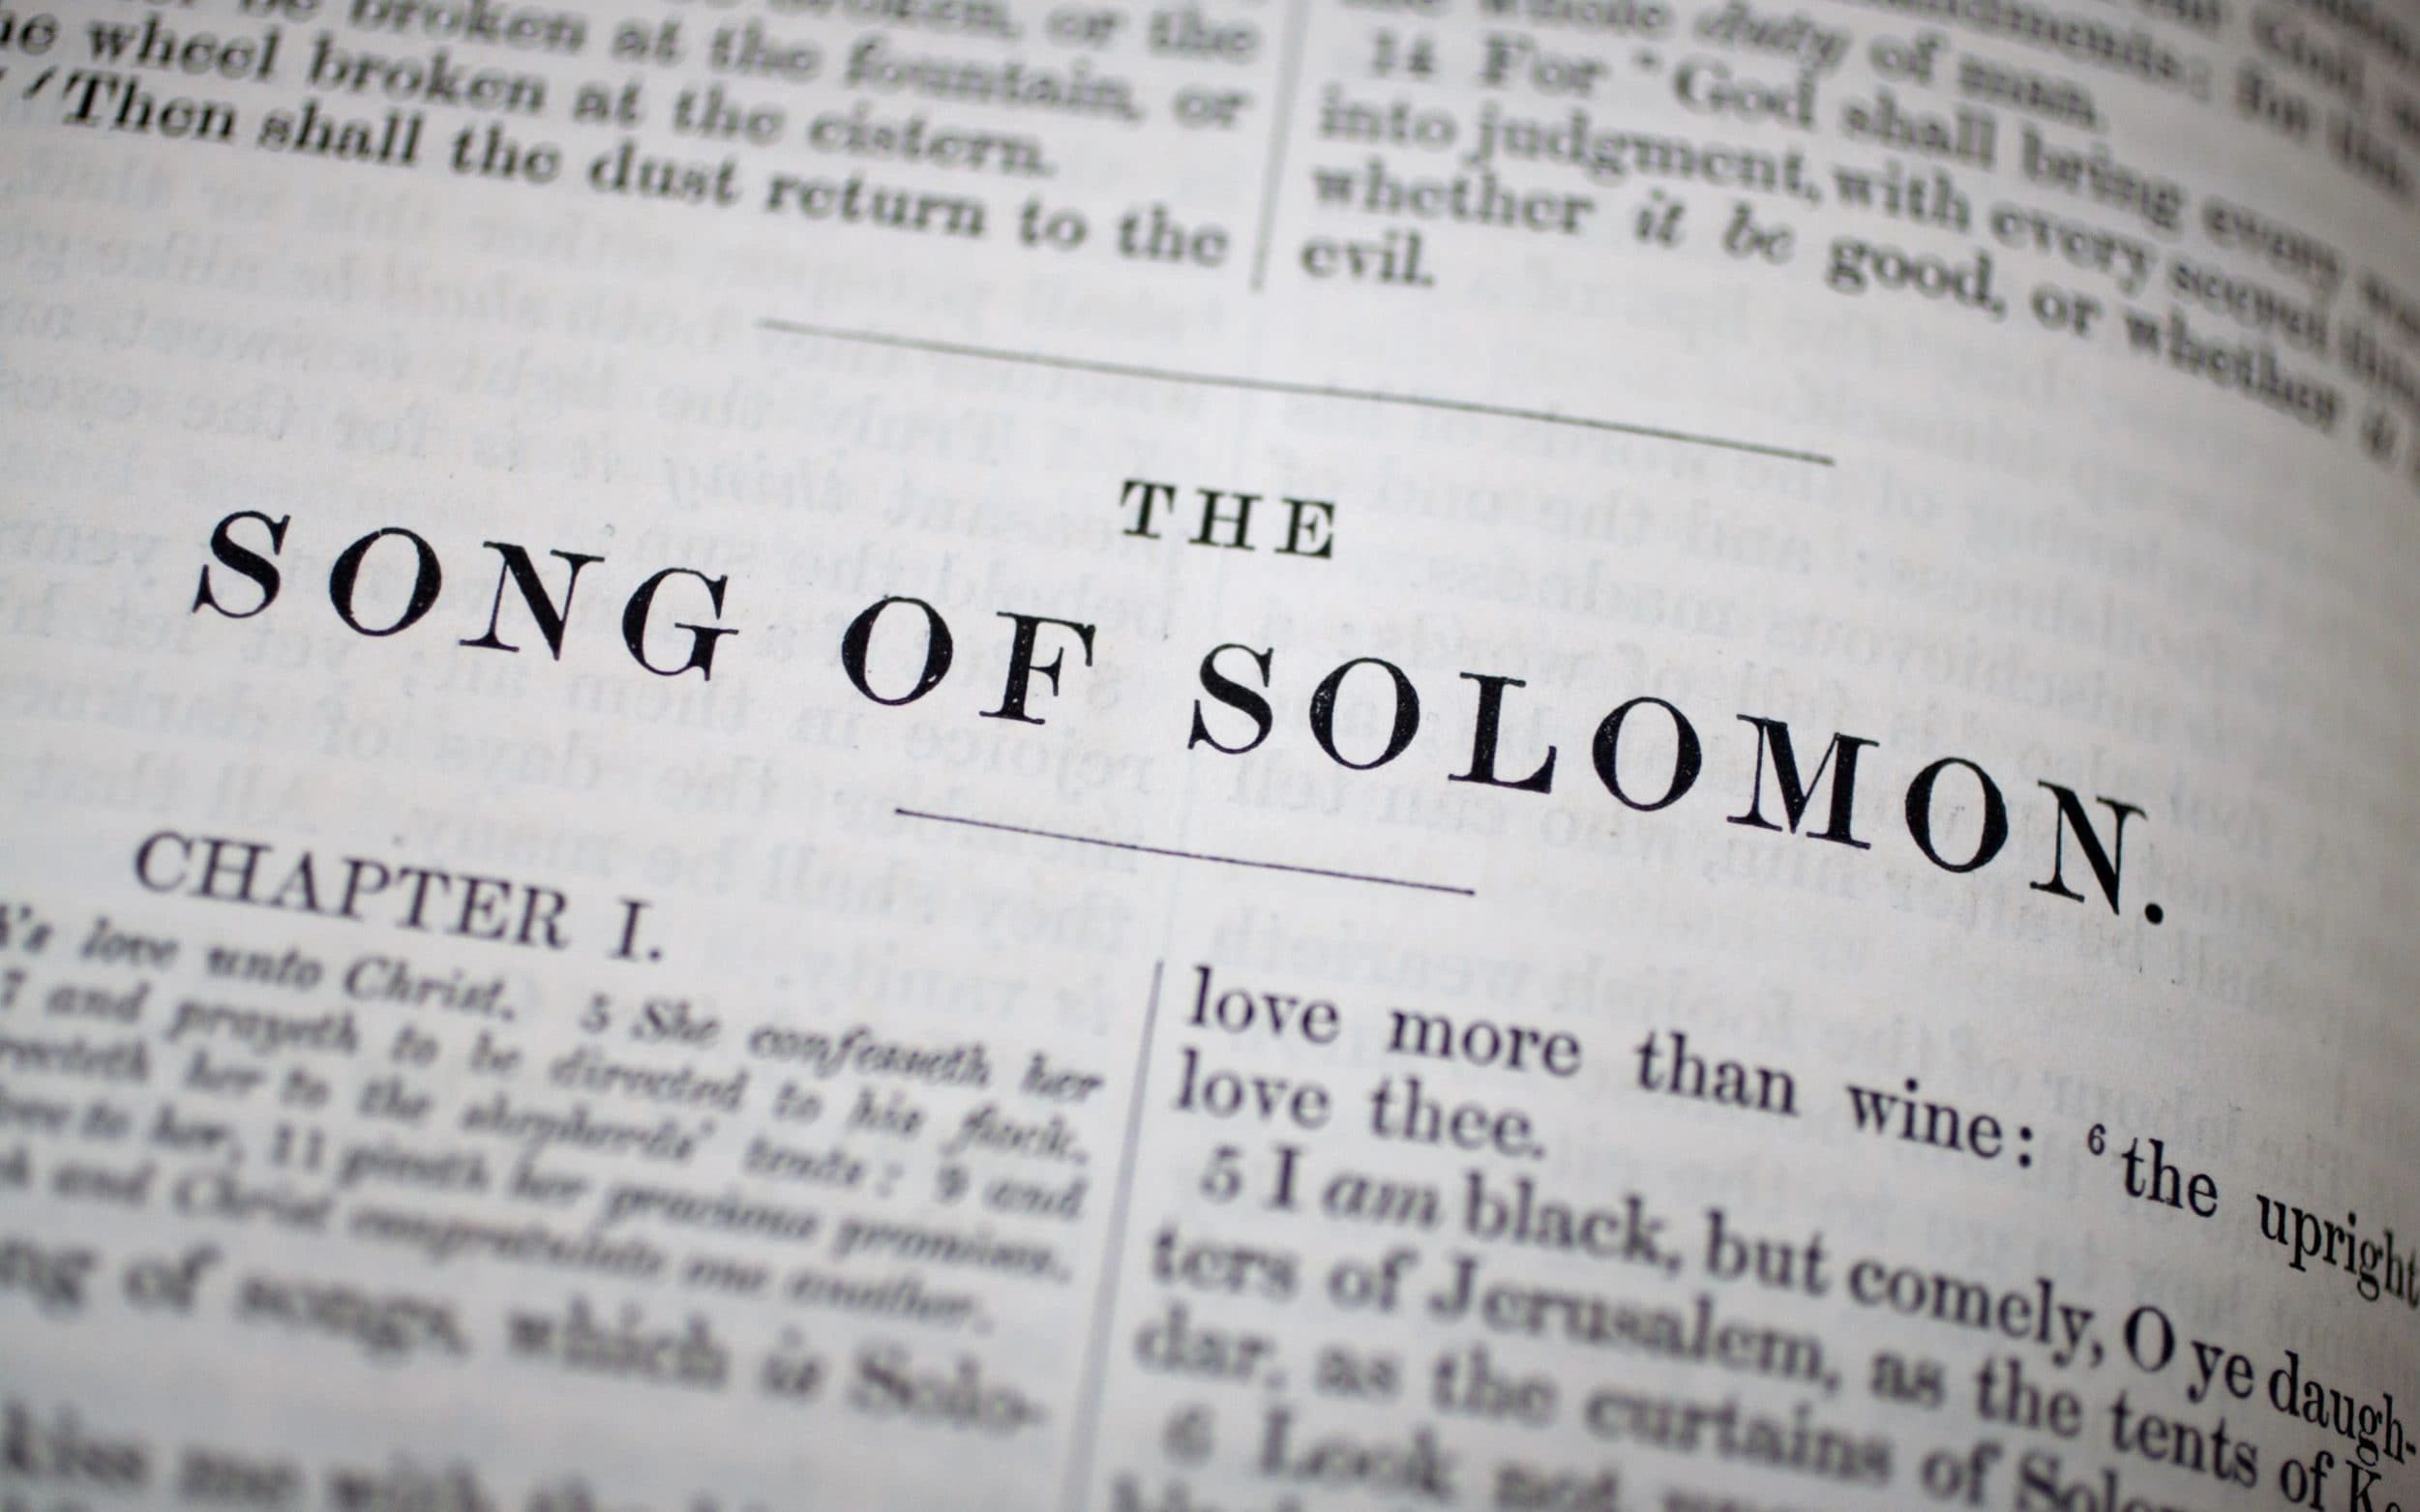 what is the ong of solomon all about